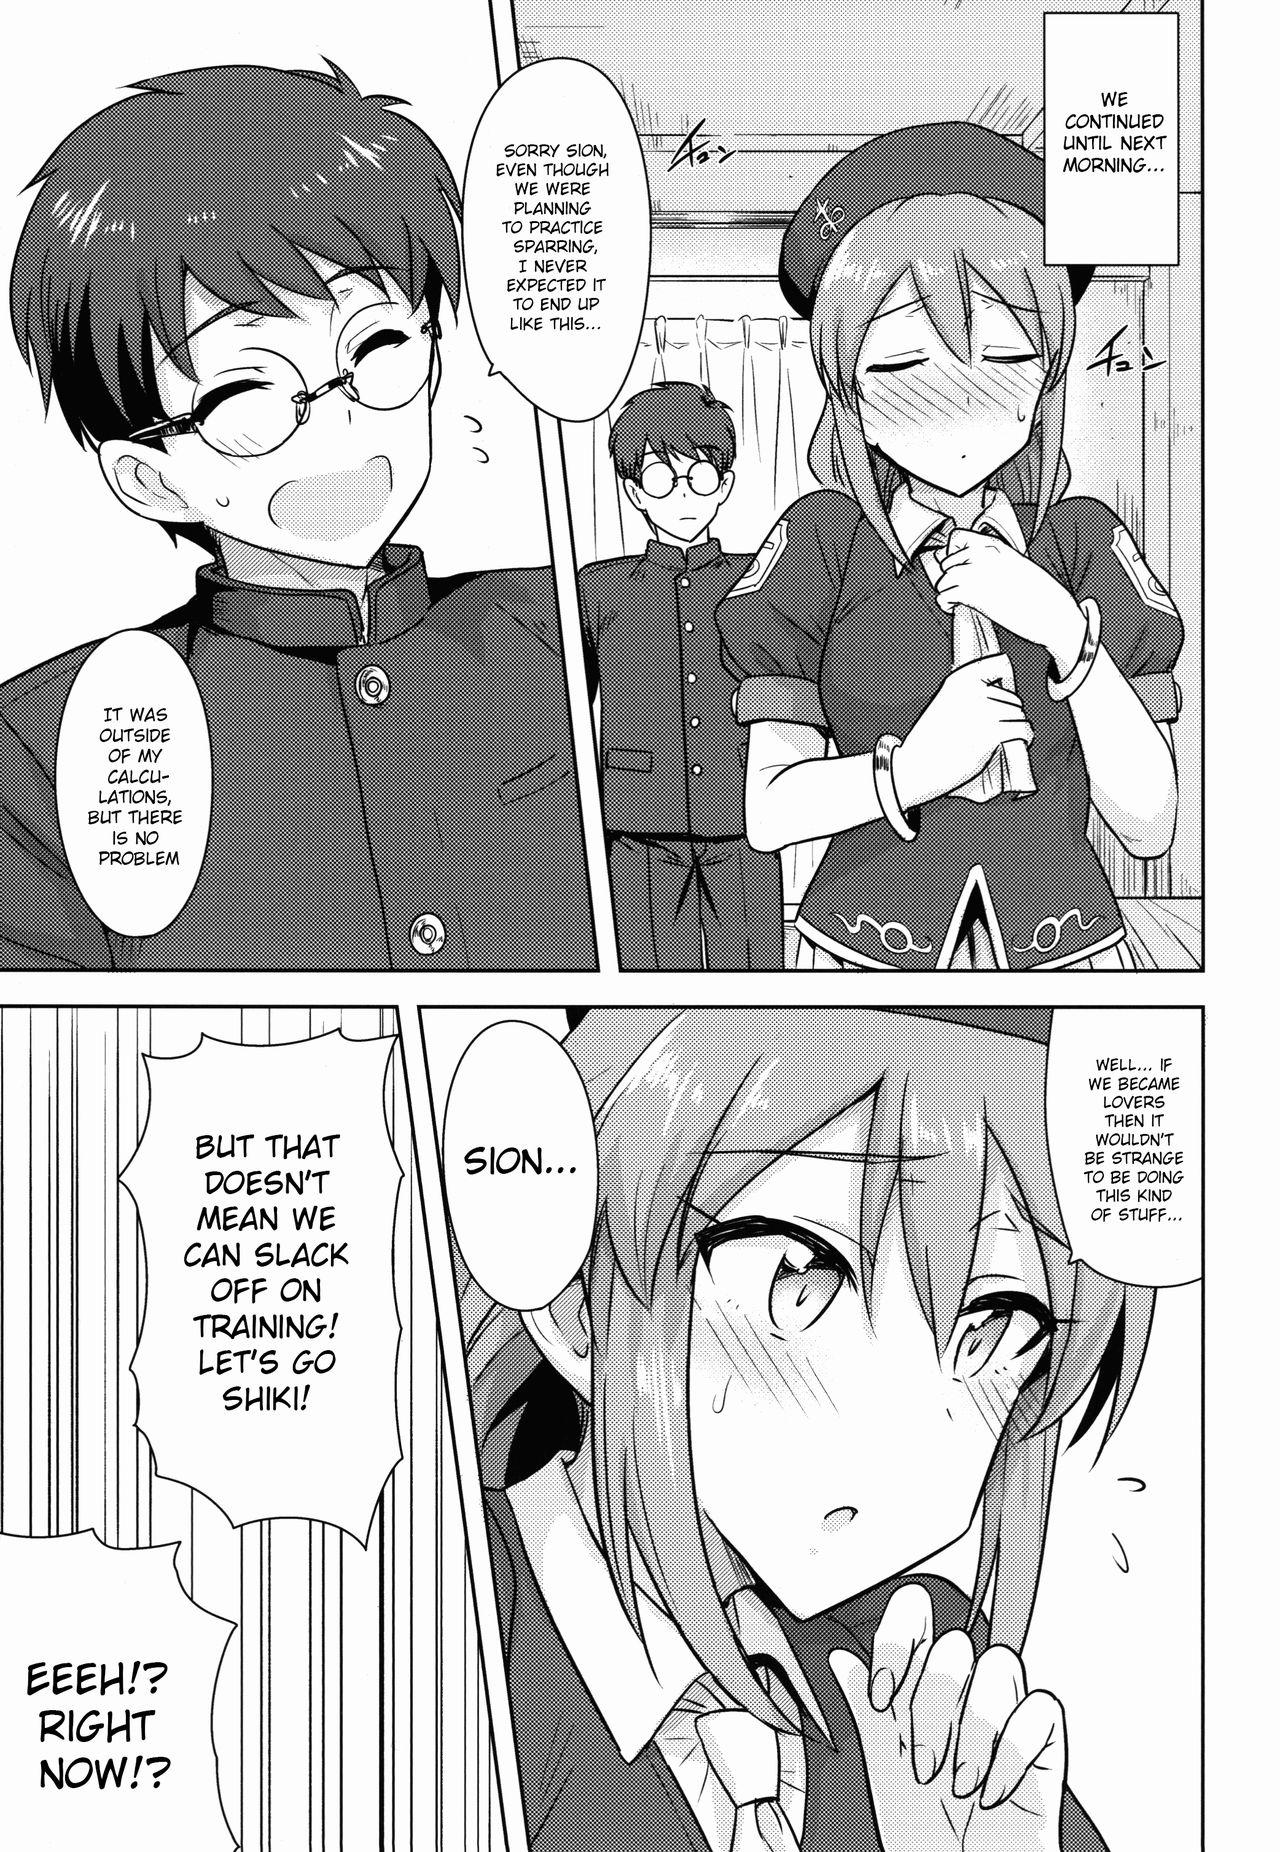 Imvu Aru Hi no Futari MelBlo Hen | A Certain Day with Each Other Melty Blood Hen - Tsukihime Candid - Page 8